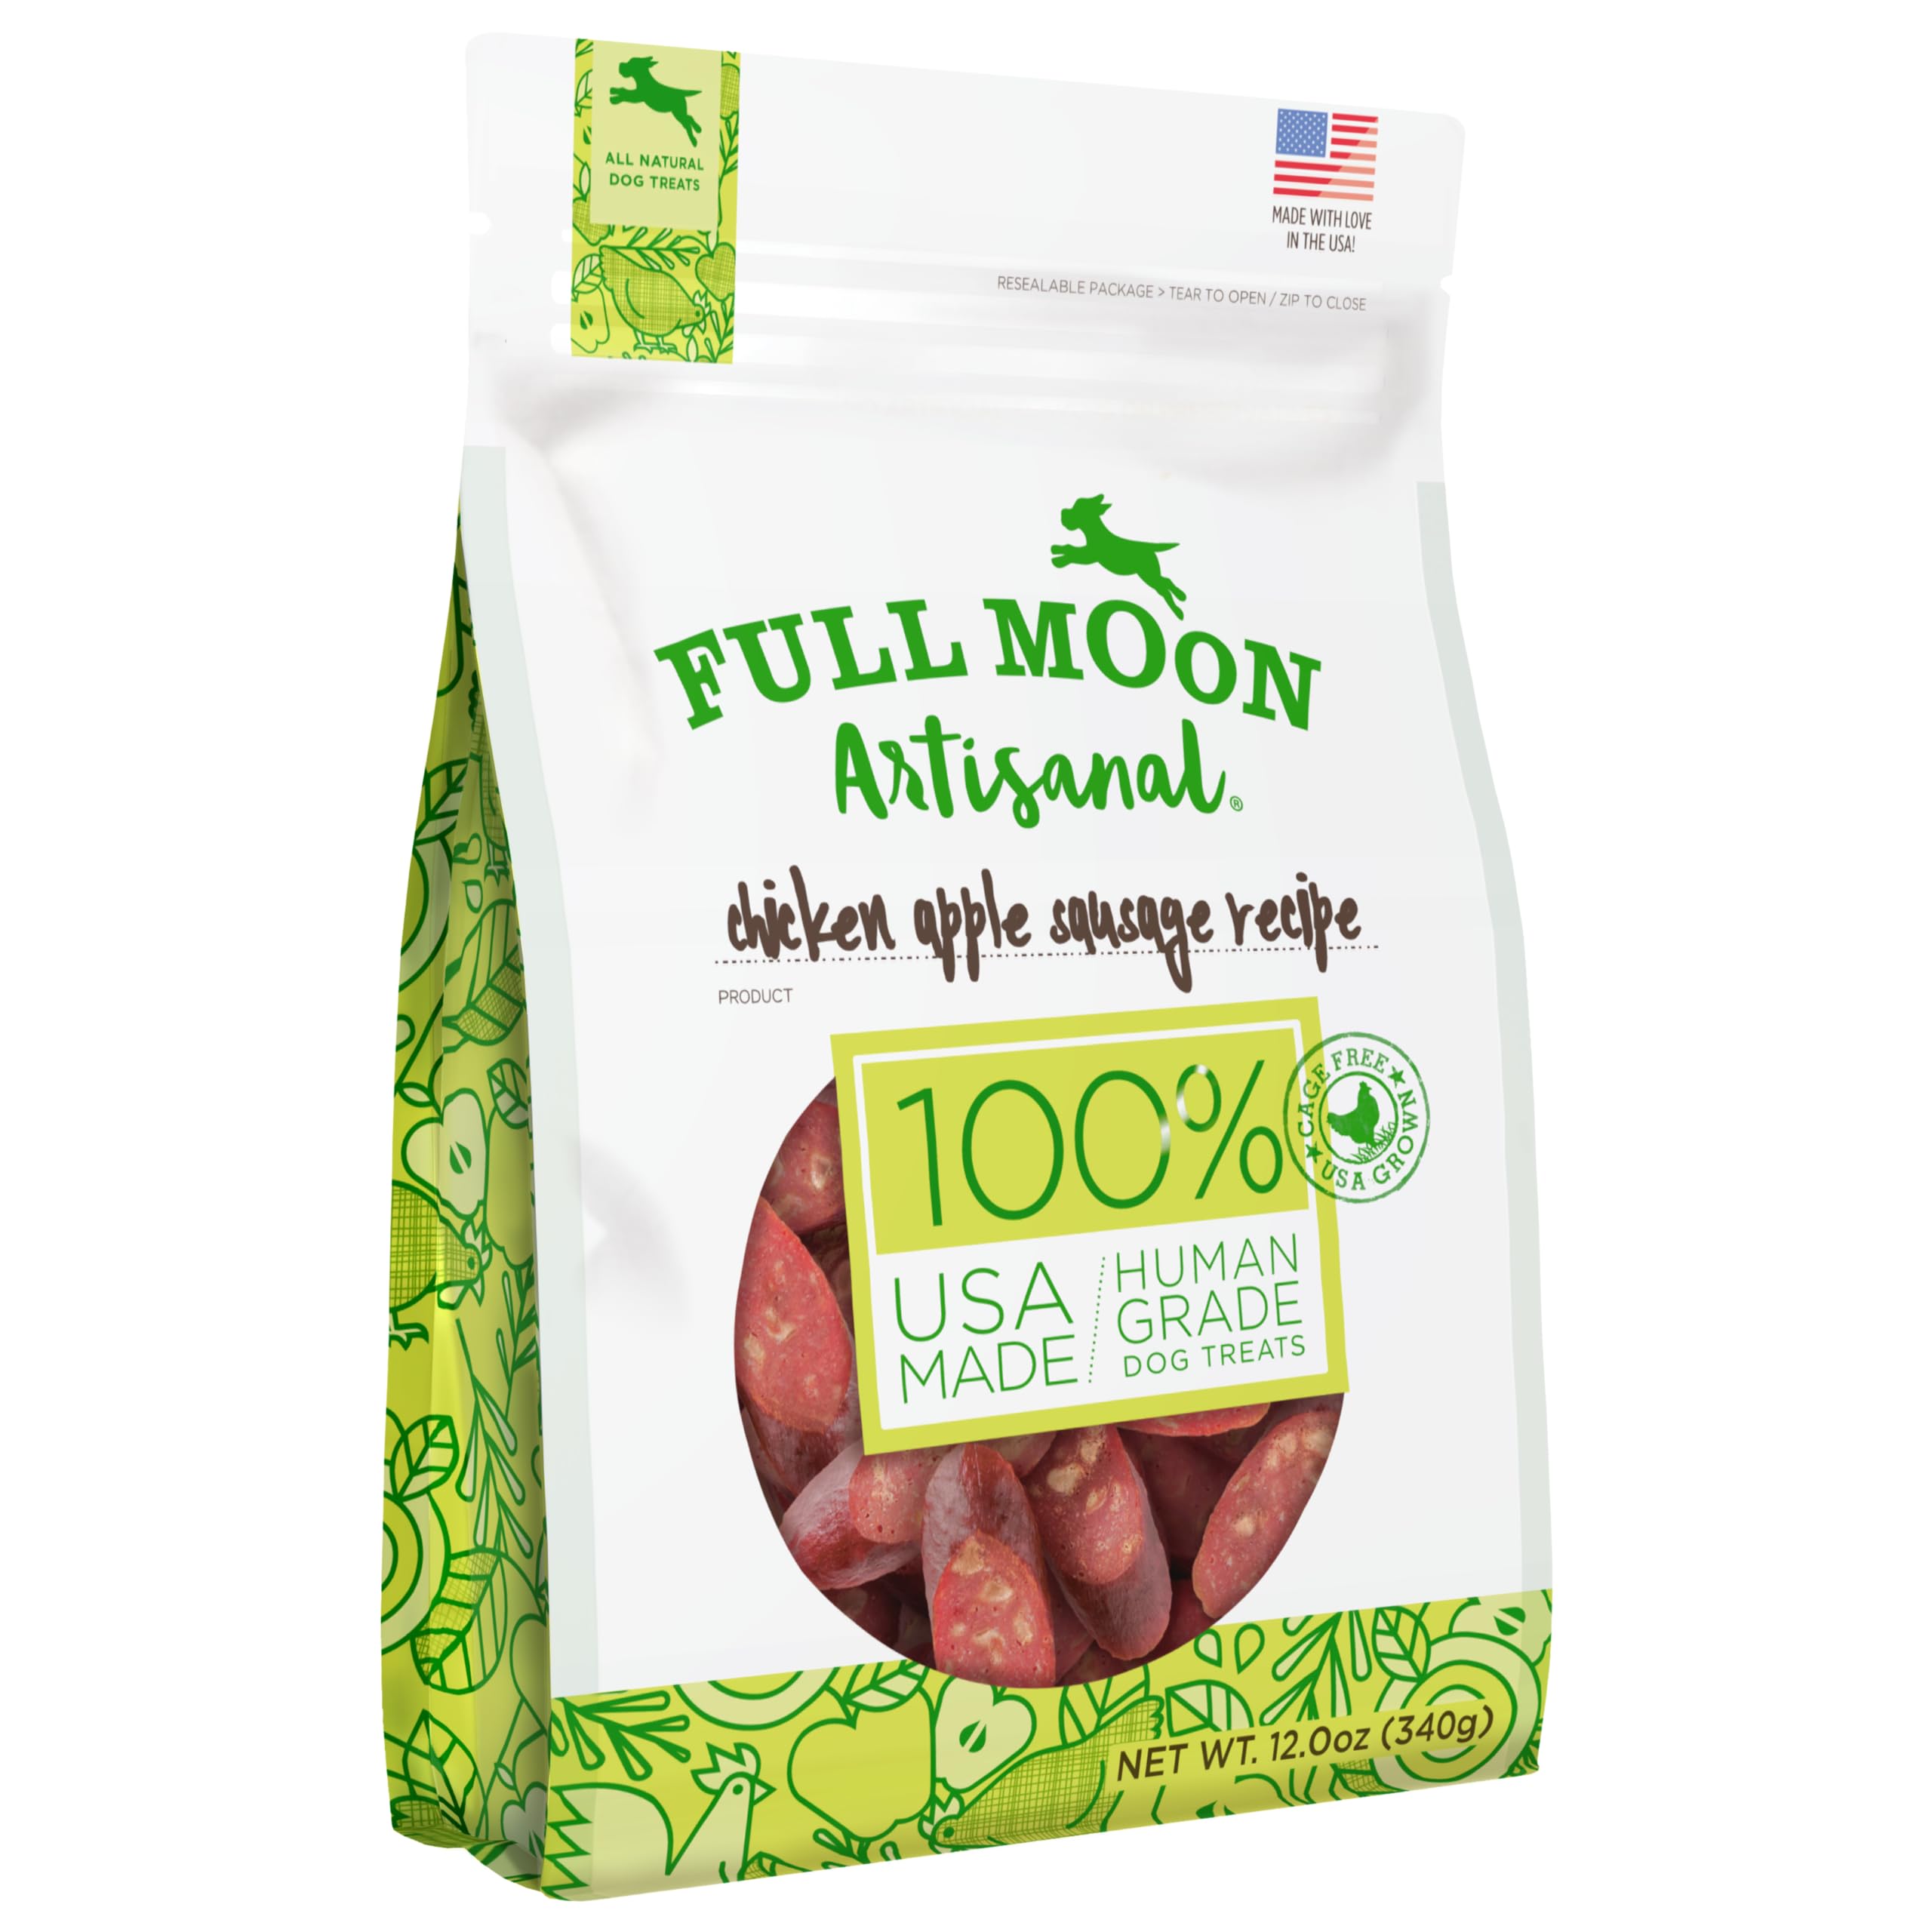 12-Oz Full Moon Chicken Apple Sausage Dog Treats & More $9.10 + Free Shipping w/ Prime or on $35+